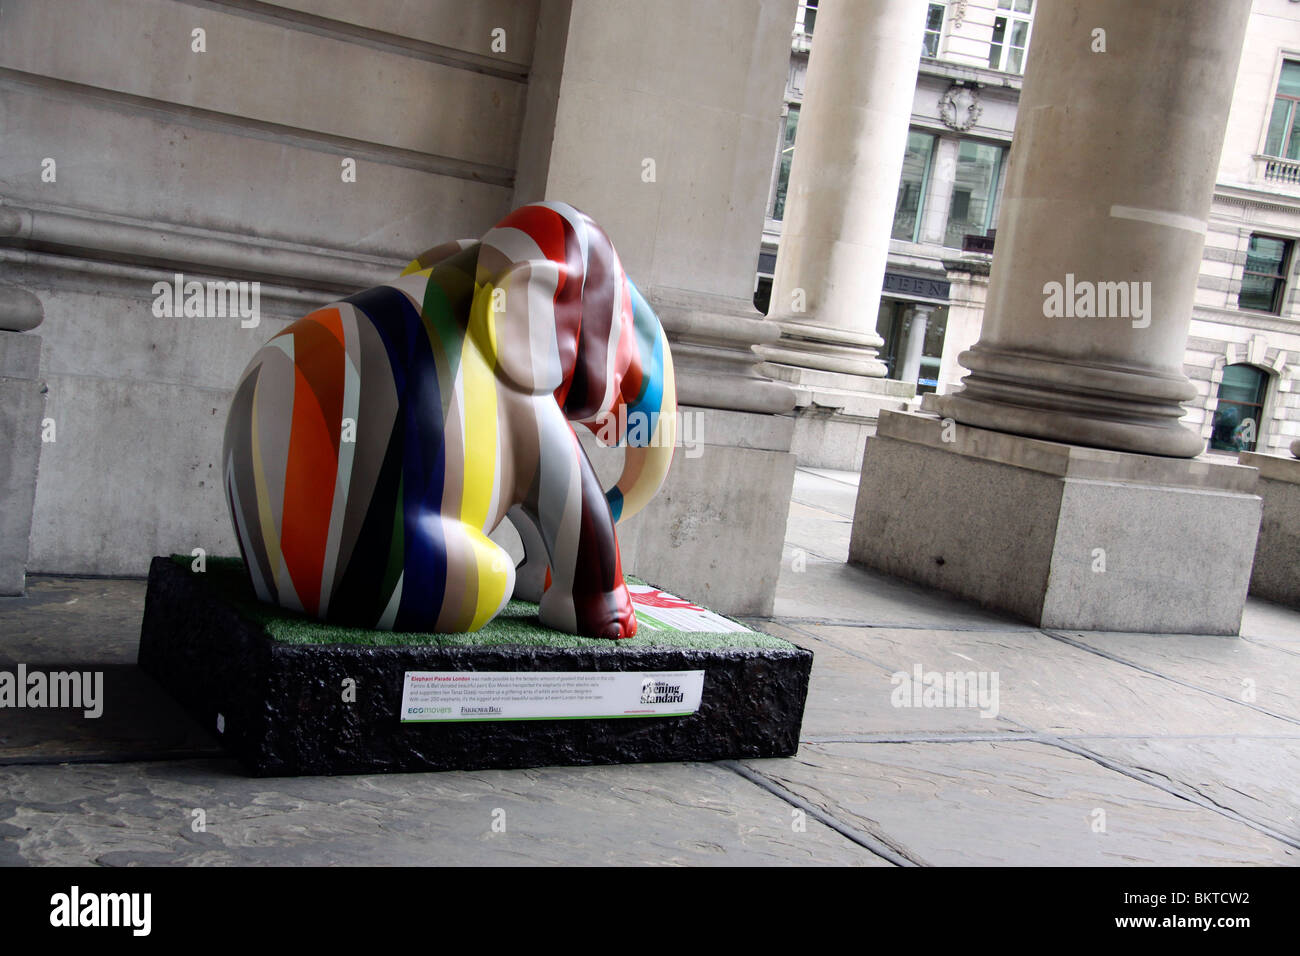 Paul Smith London High Resolution Stock Photography and Images - Alamy